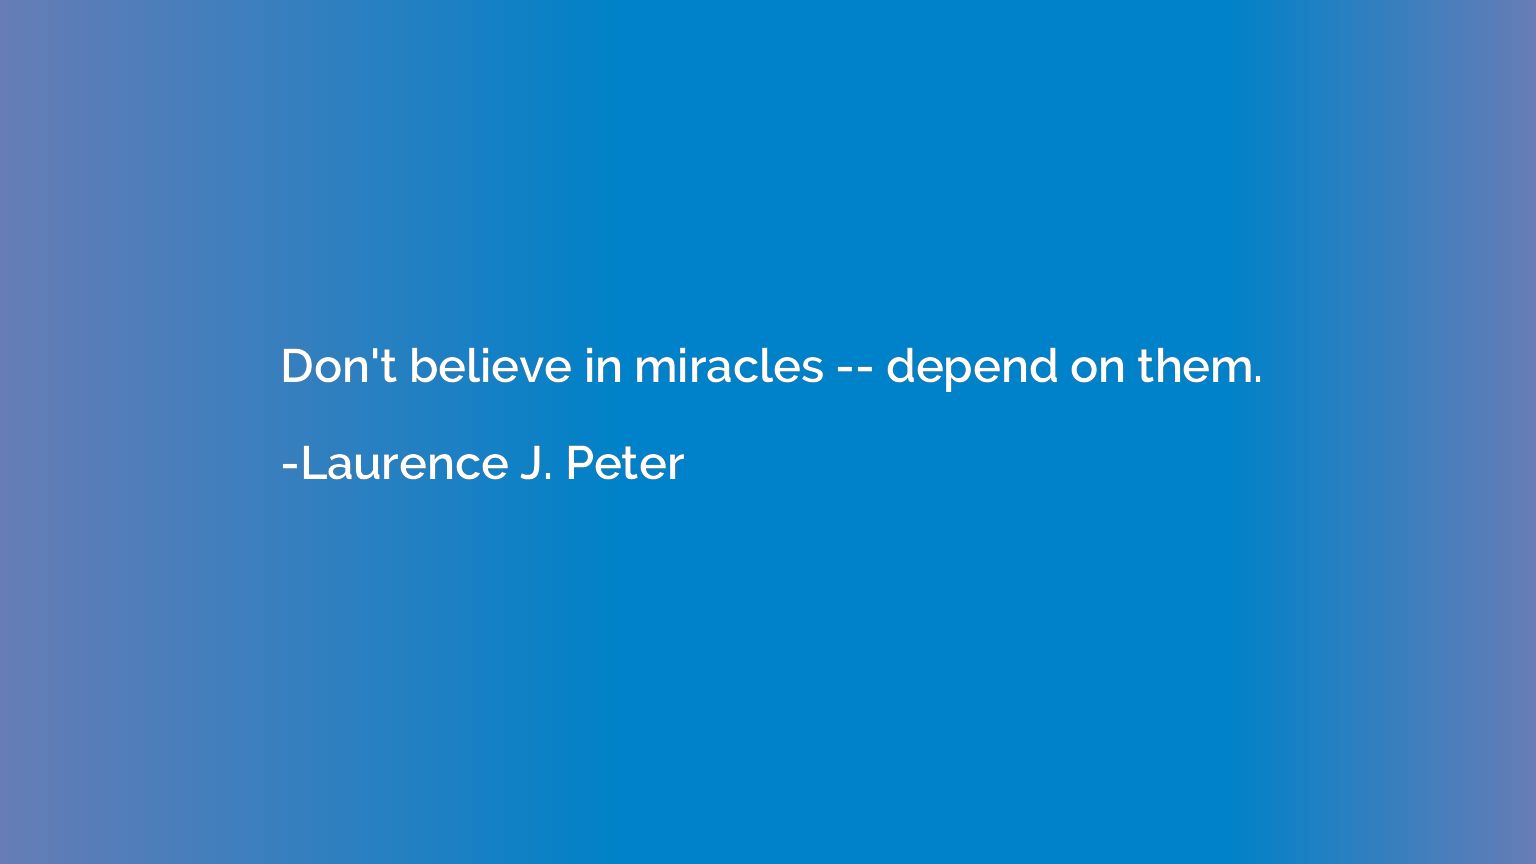 Don't believe in miracles -- depend on them.